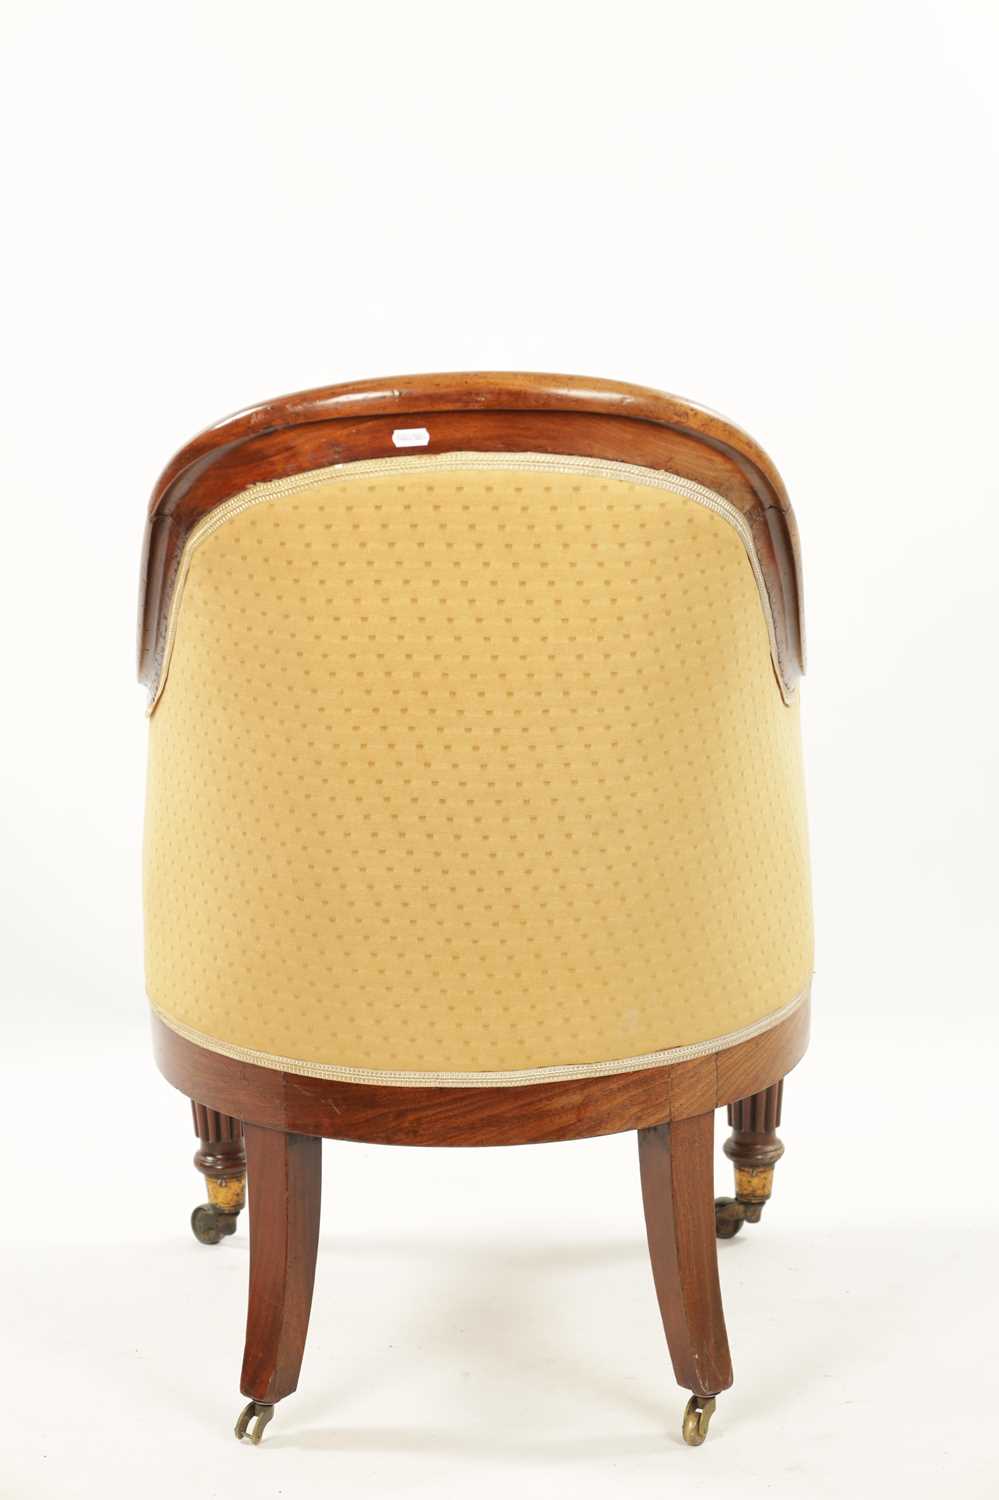 A REGENCY MAHOGANY LIBRARY TUB CHAIR IN THE MANNER OF GILLOWS - Image 7 of 13